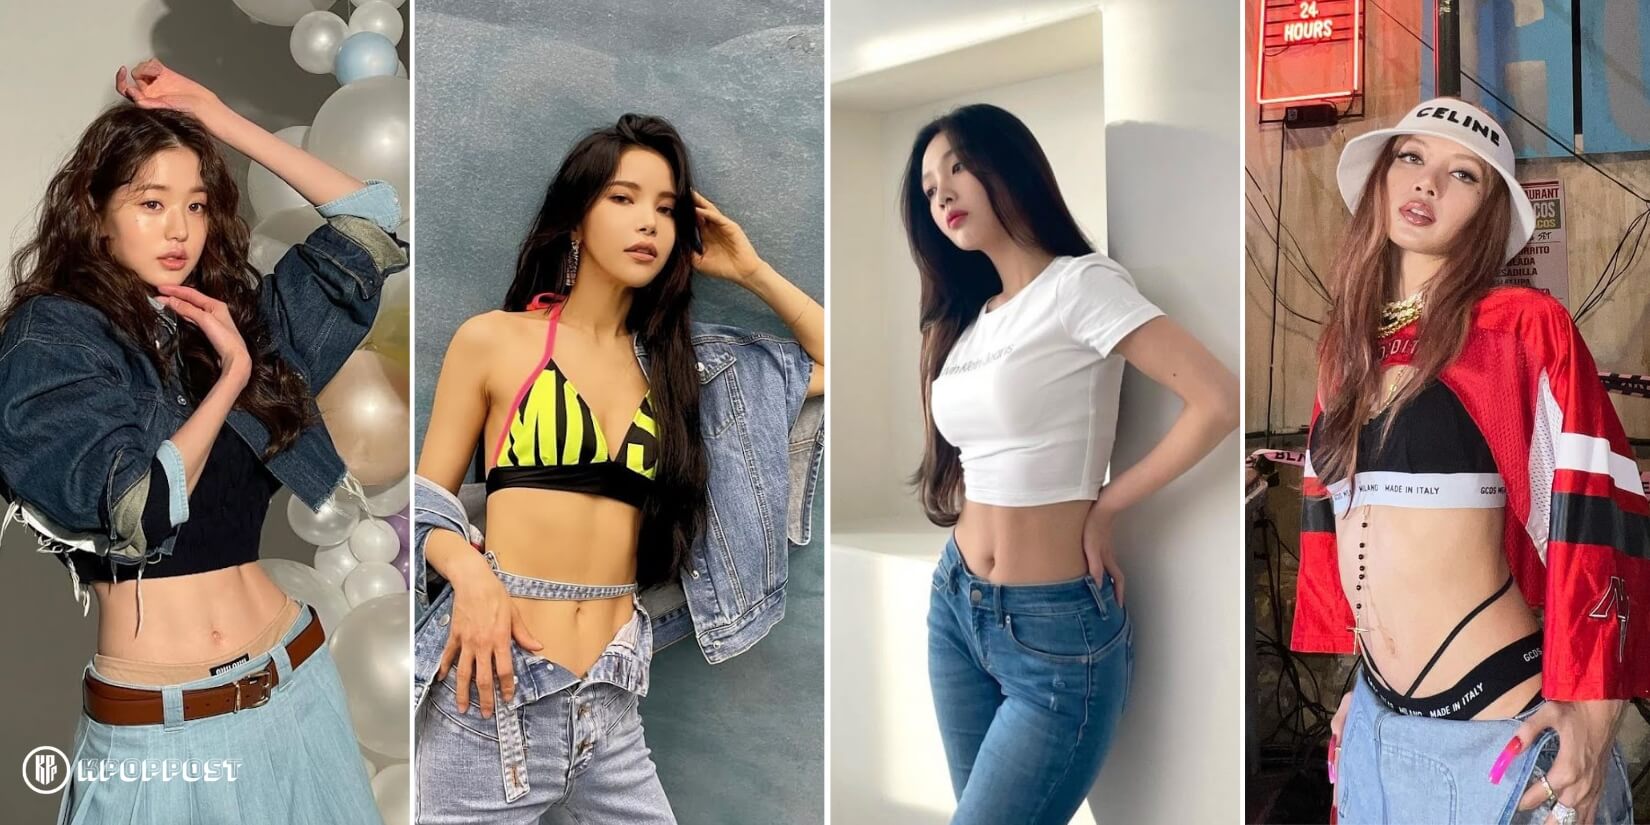 NewJeans style: 10 of the K-pop girl group's best outfits